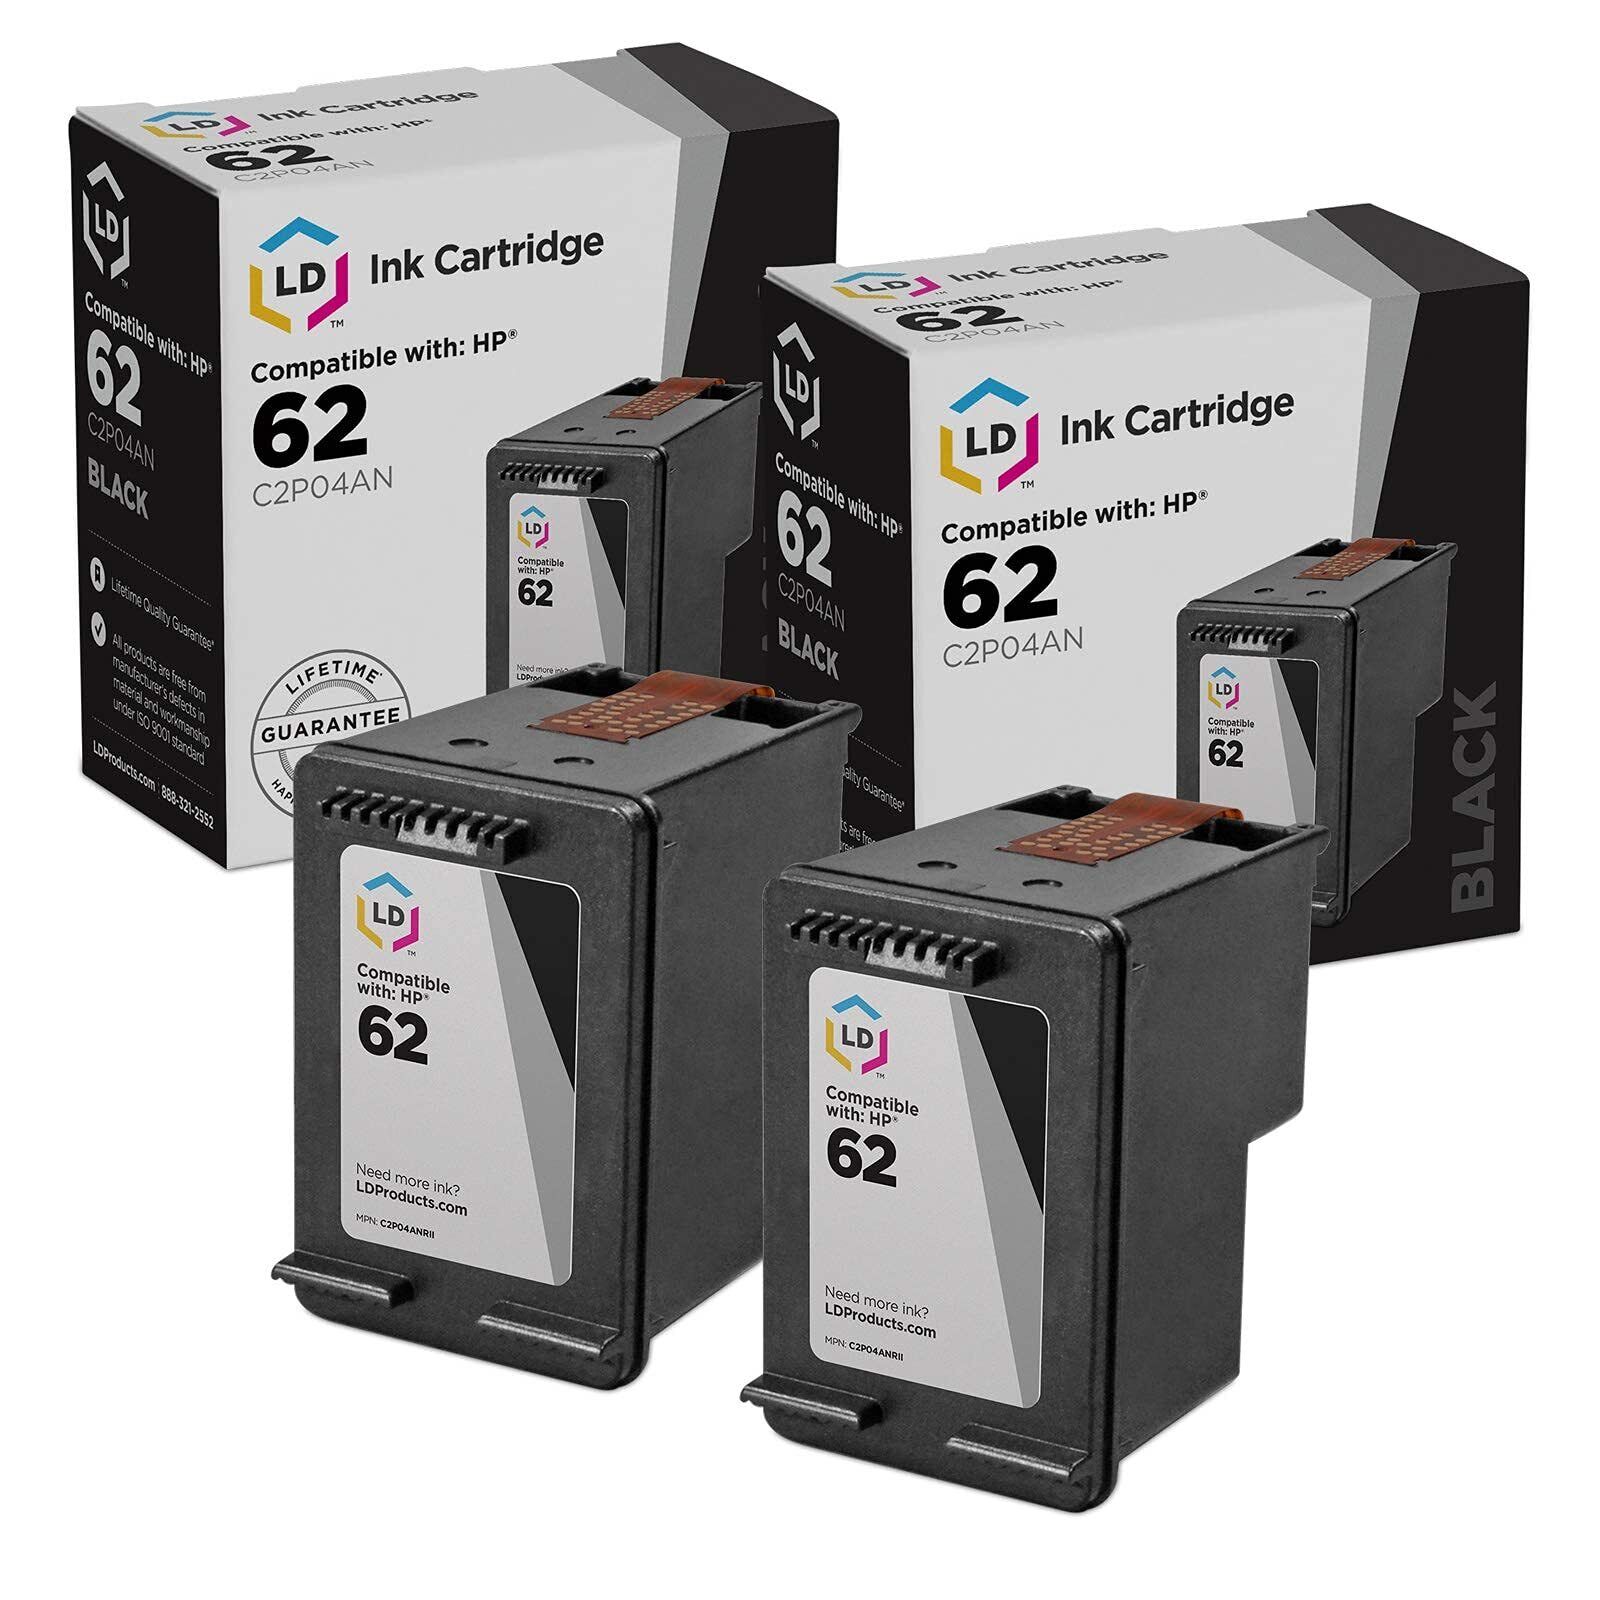 LD Ink Cartridge Replacement for HP 62 C2P04AN (Black, 2-Pack)